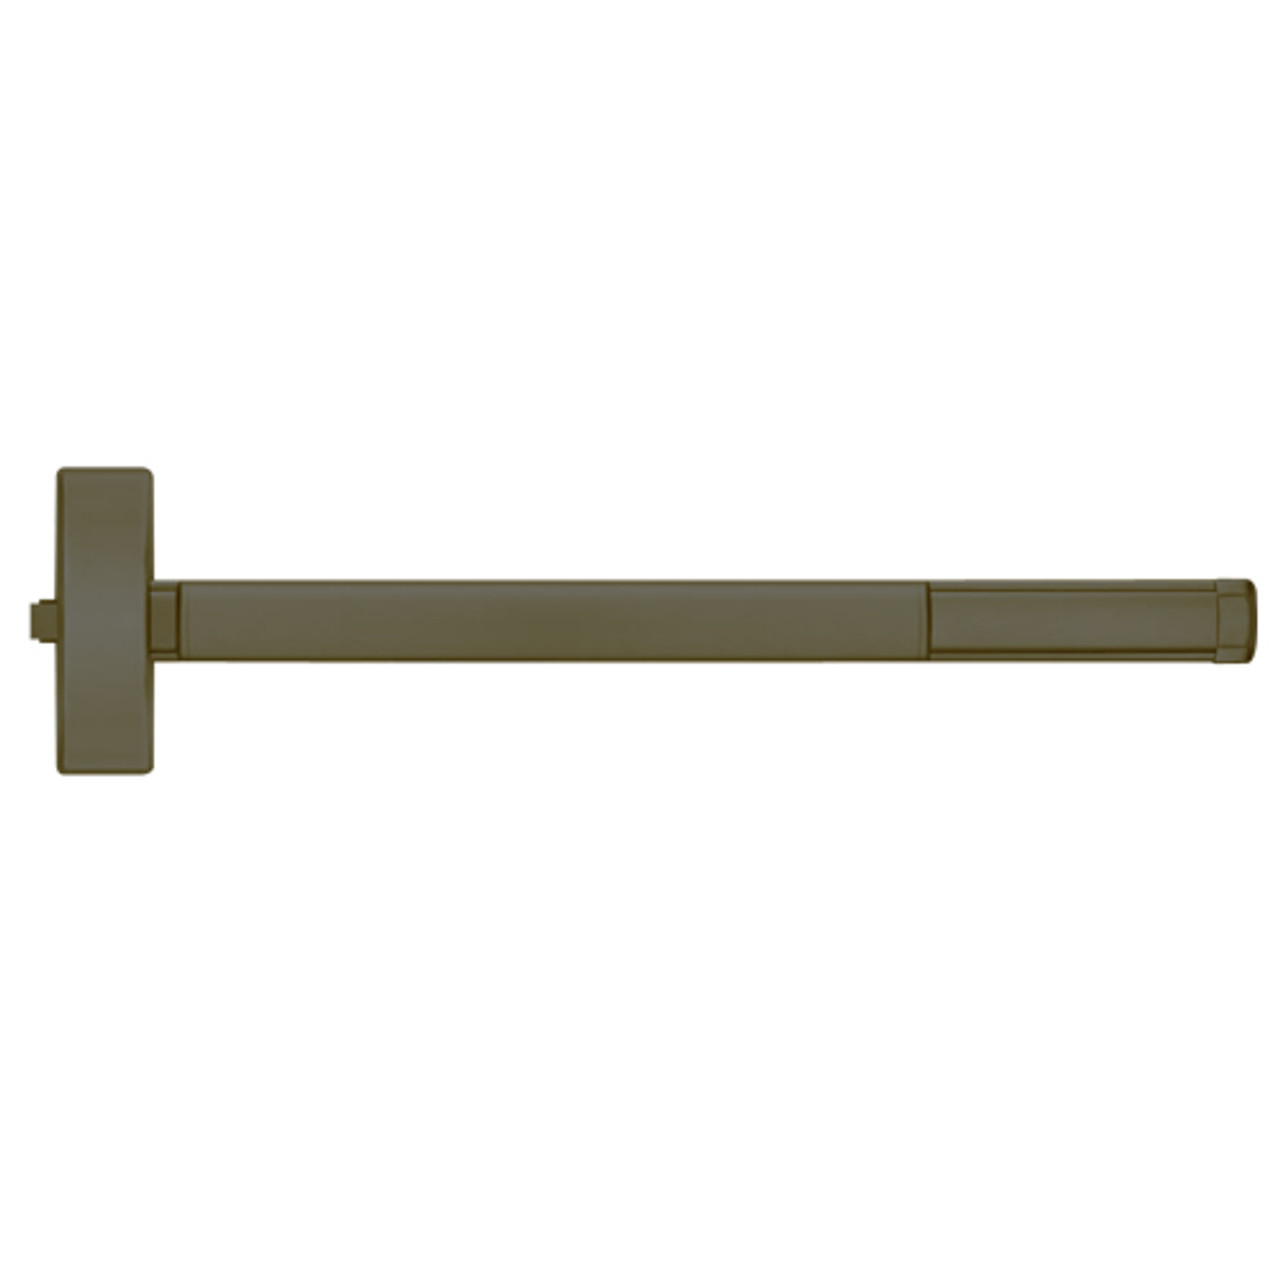 ELRFL2115-613-36 PHI 2100 Series Fire Rated Apex Rim Exit Device with Electric Latch Retraction Prepped for Thumb Piece Always Active in Oil Rubbed Bronze Finish